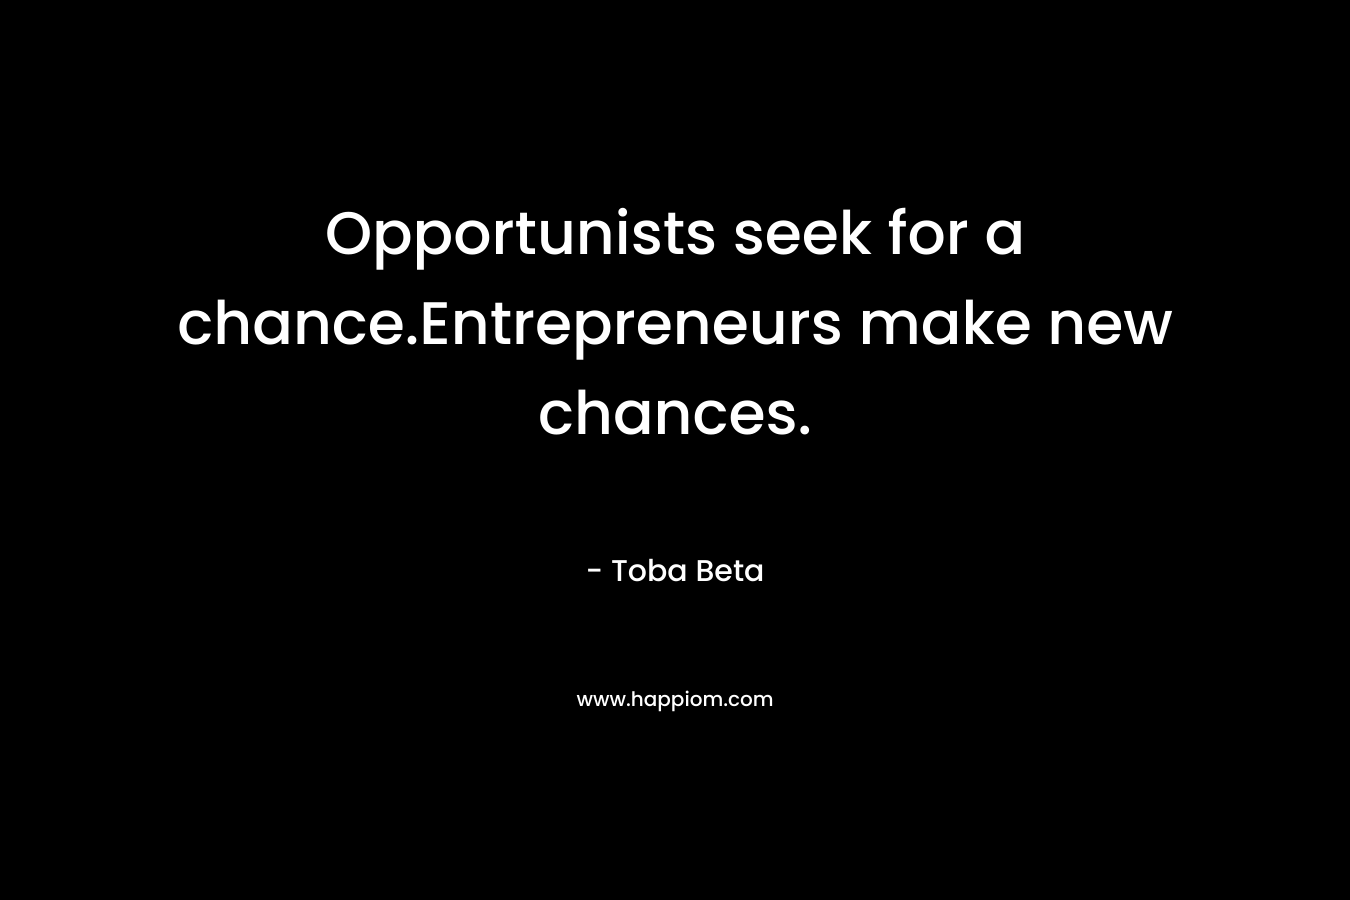 Opportunists seek for a chance.Entrepreneurs make new chances. – Toba Beta